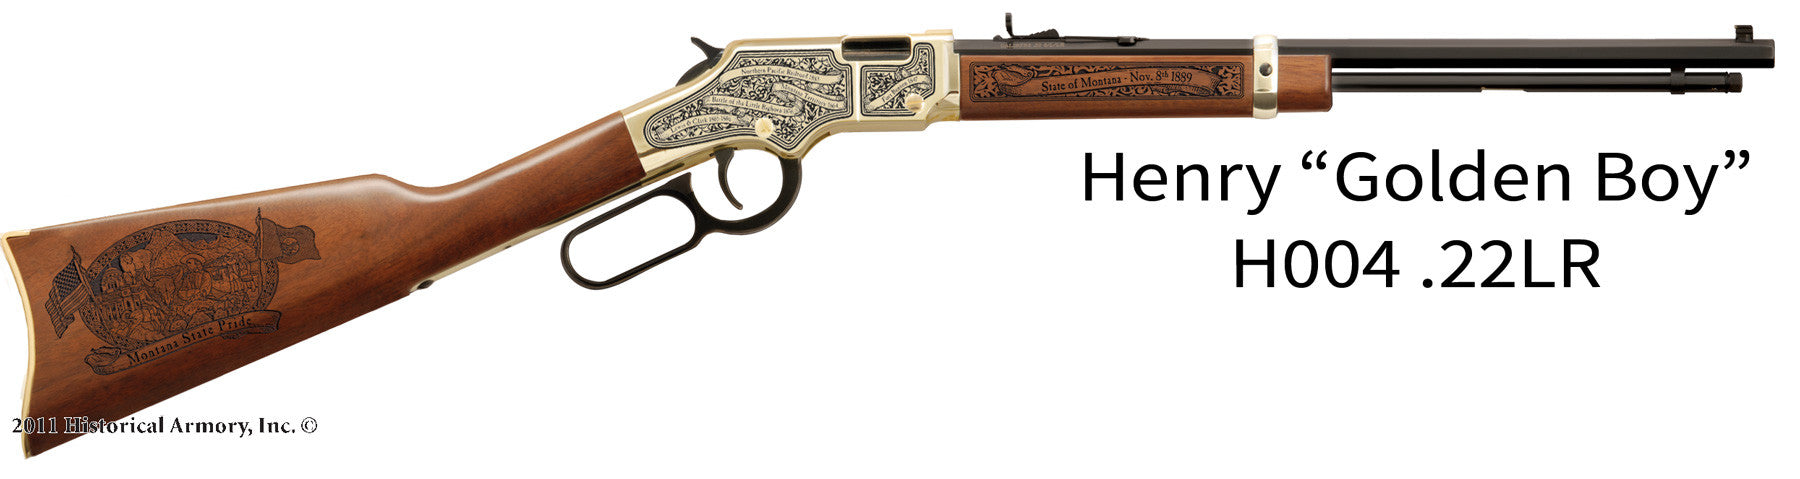 Montana State Pride Engraved Golden Boy Henry Rifle